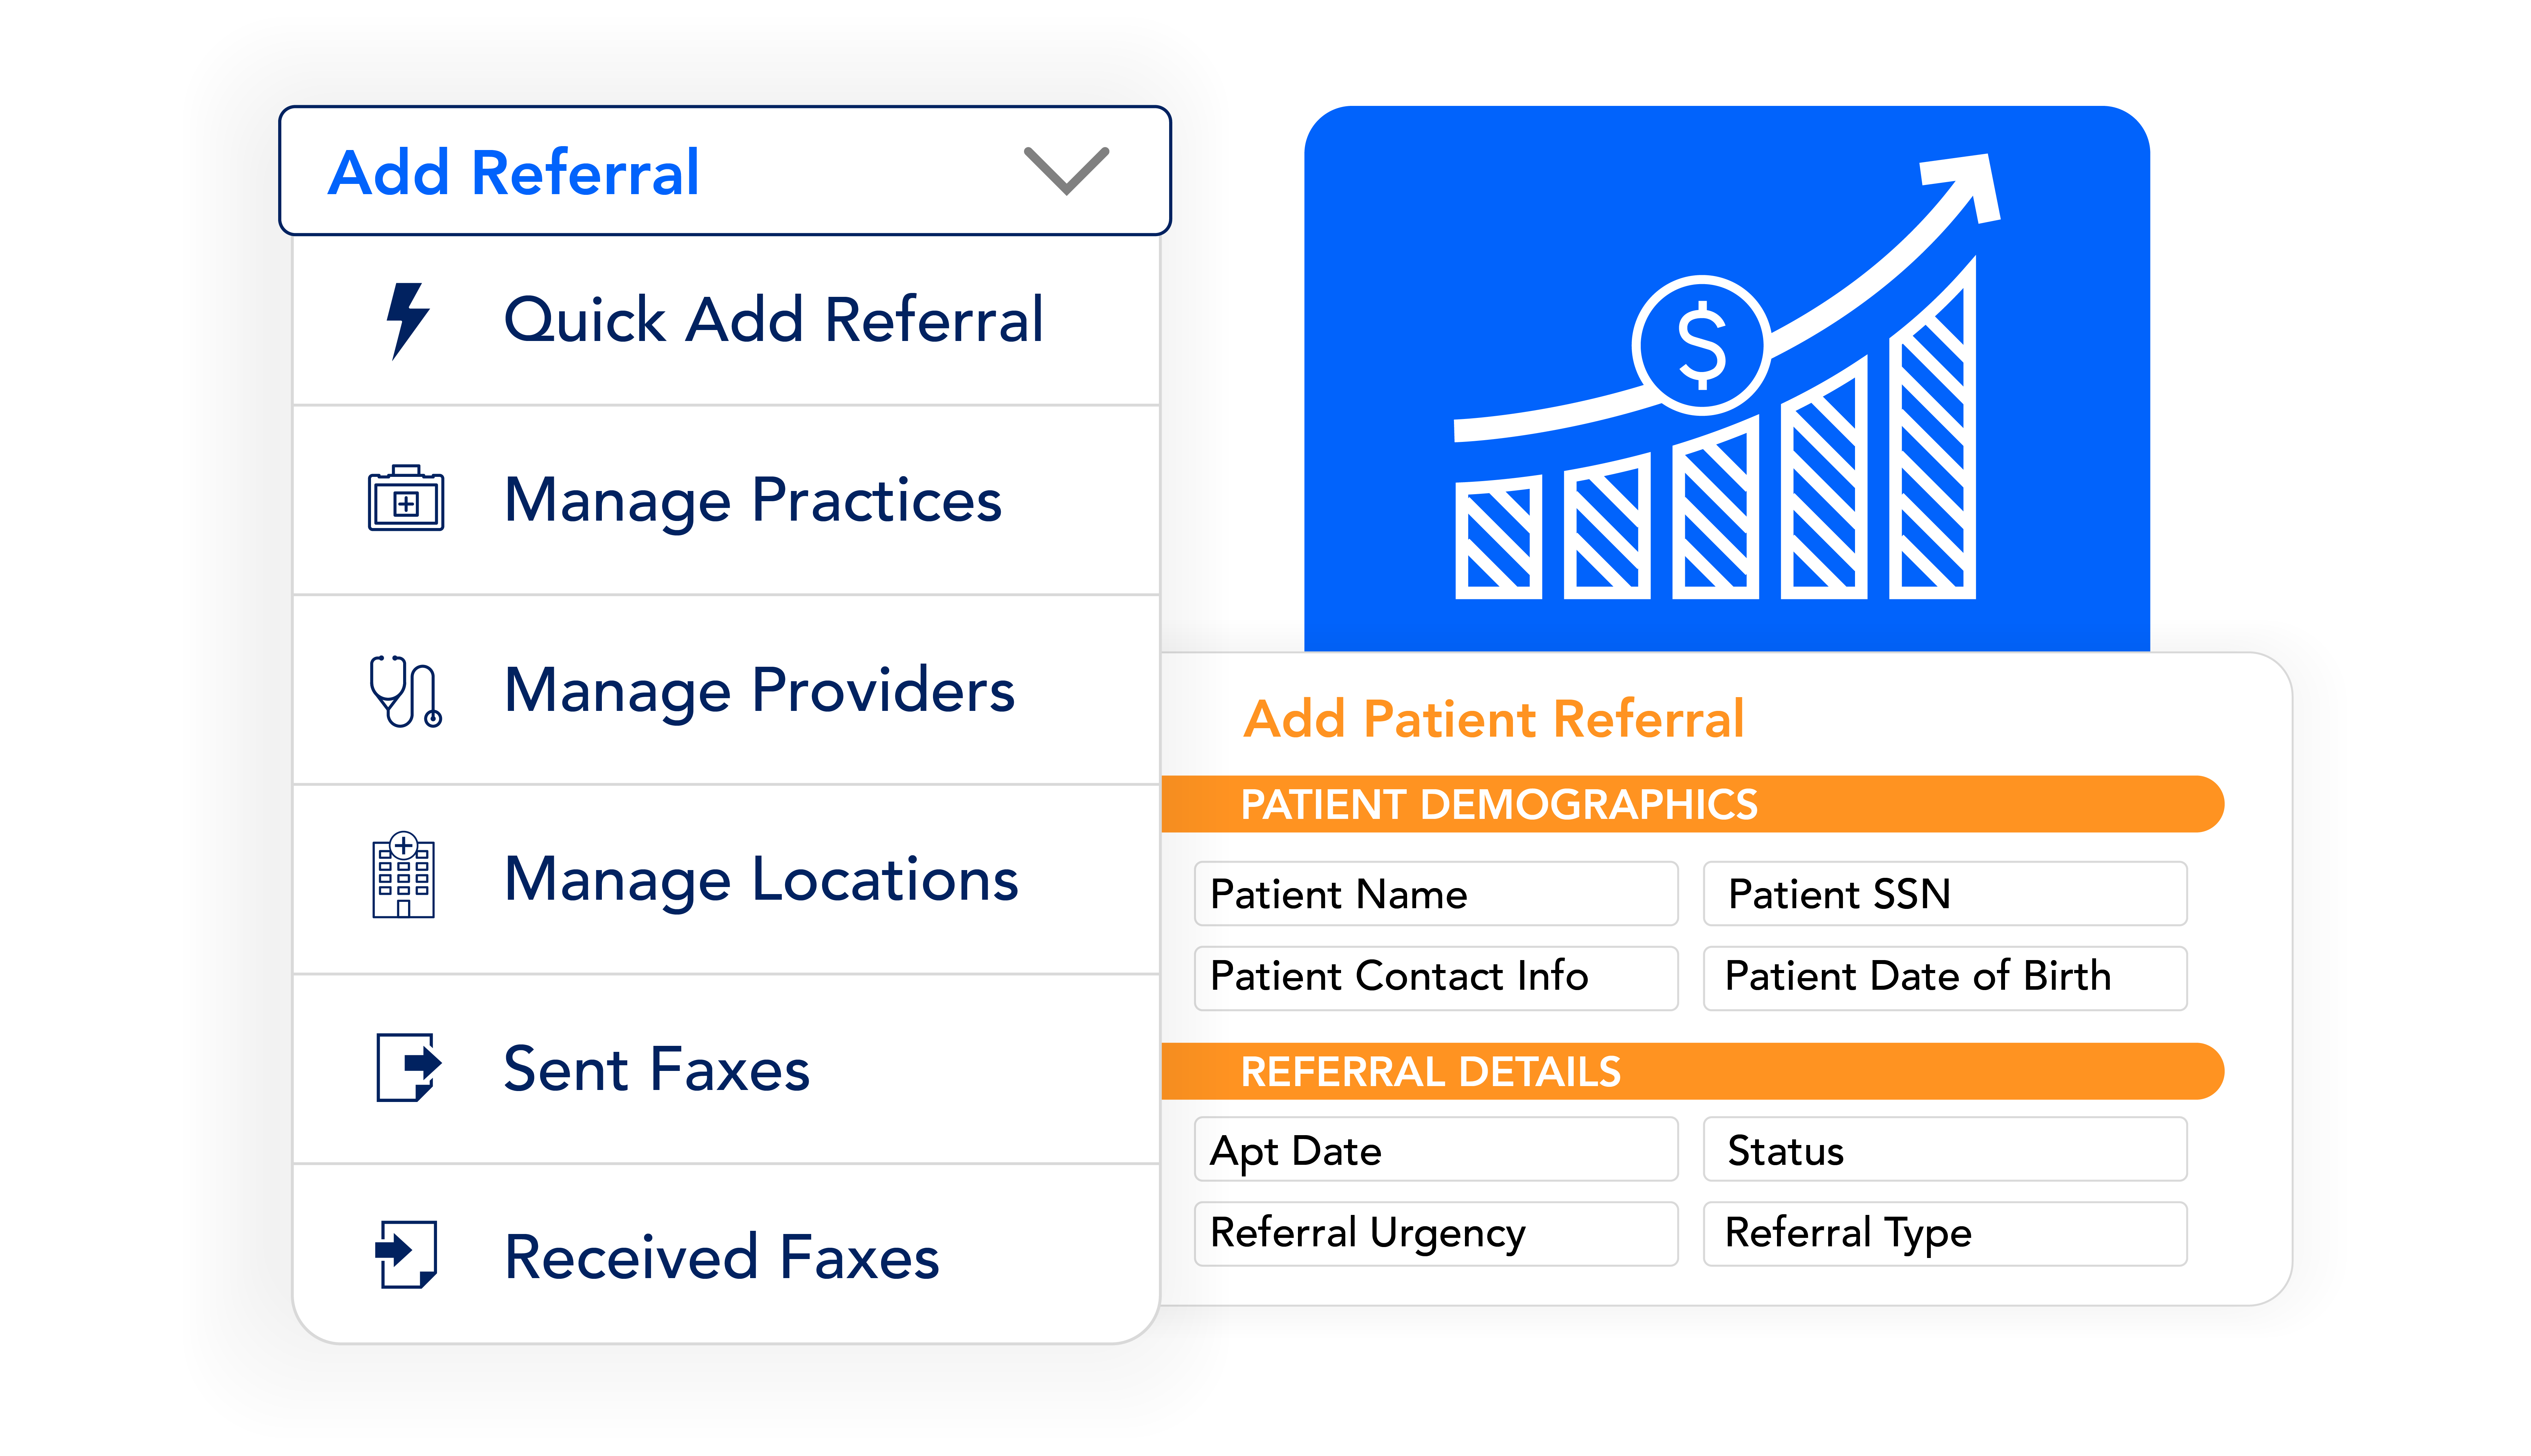 referral care coordination portal and data. dashboard showing patient referral like demographics and details with revenue going up.